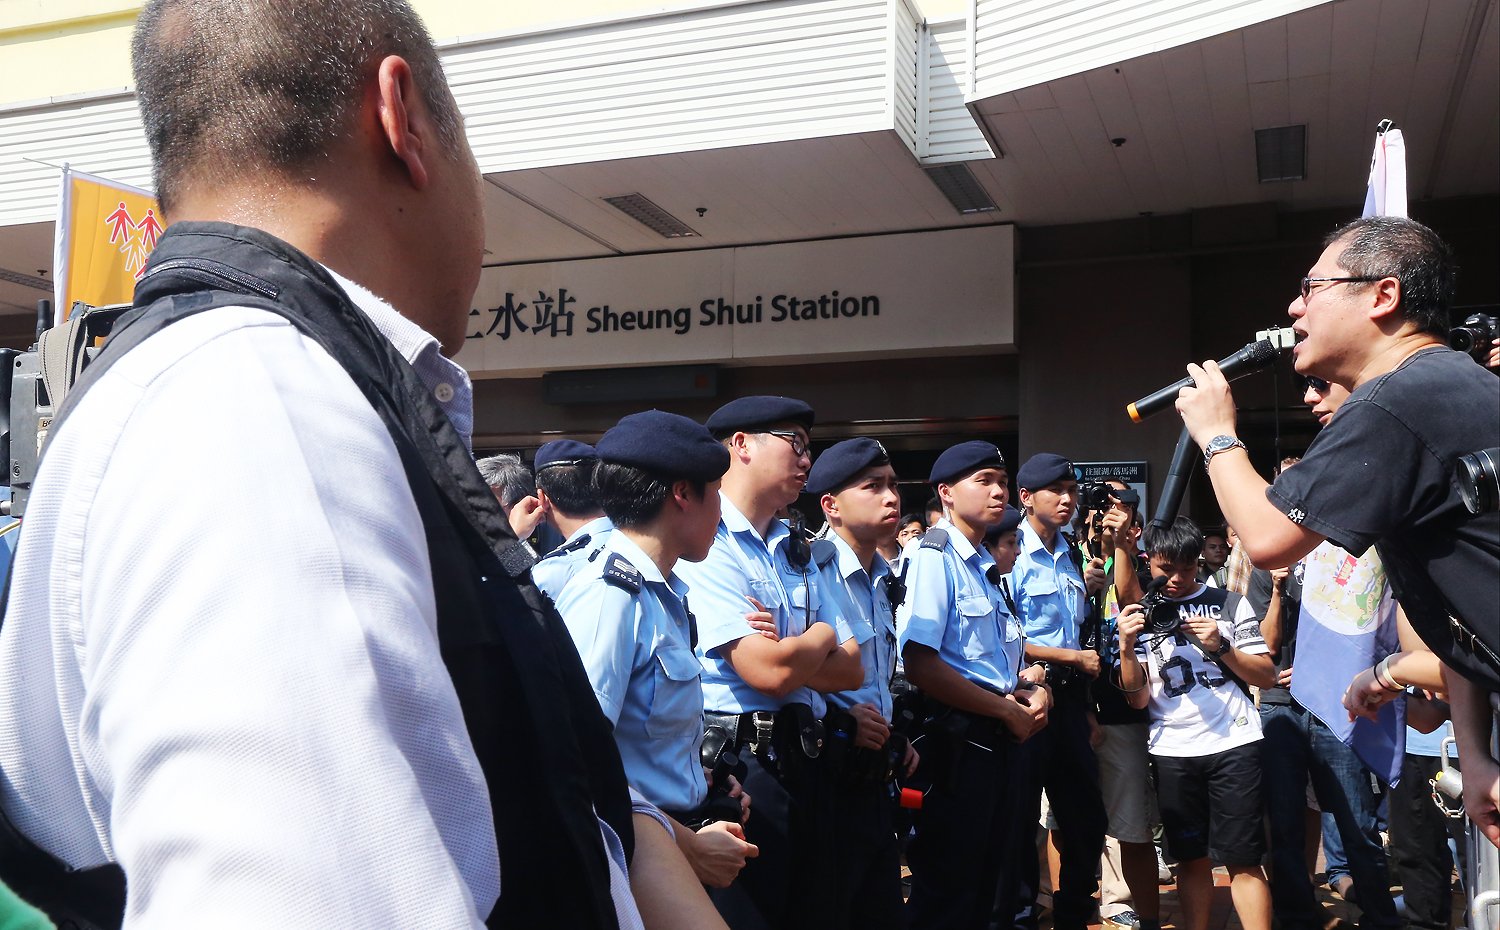 Members of Local League protest against parallel trading outside Sheung Shui MTR Station in Sheung Shui. Photo: David Wong/SCMP